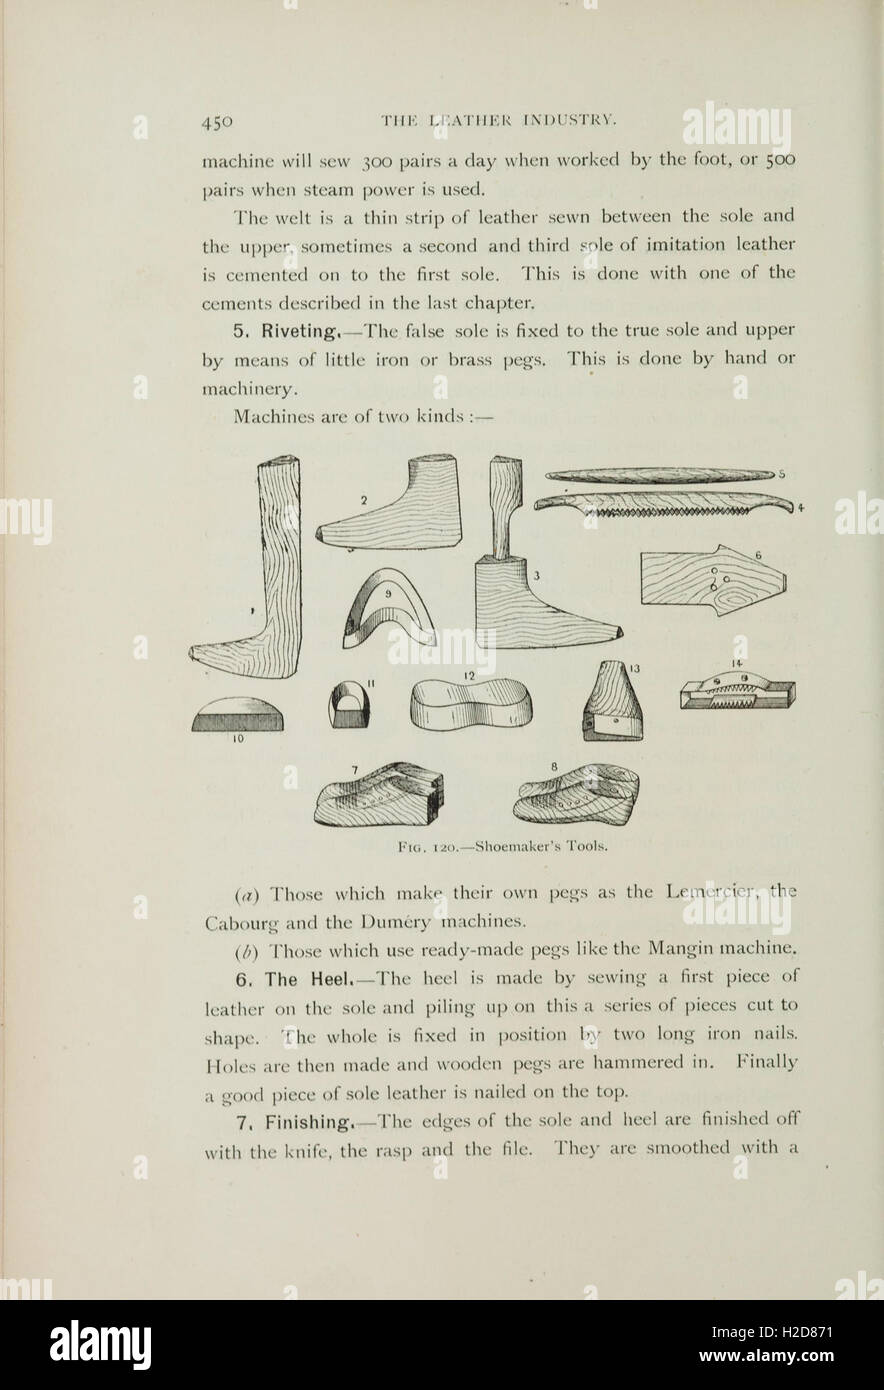 Practical treatise on the leather industry (Page 450) Stock Photo